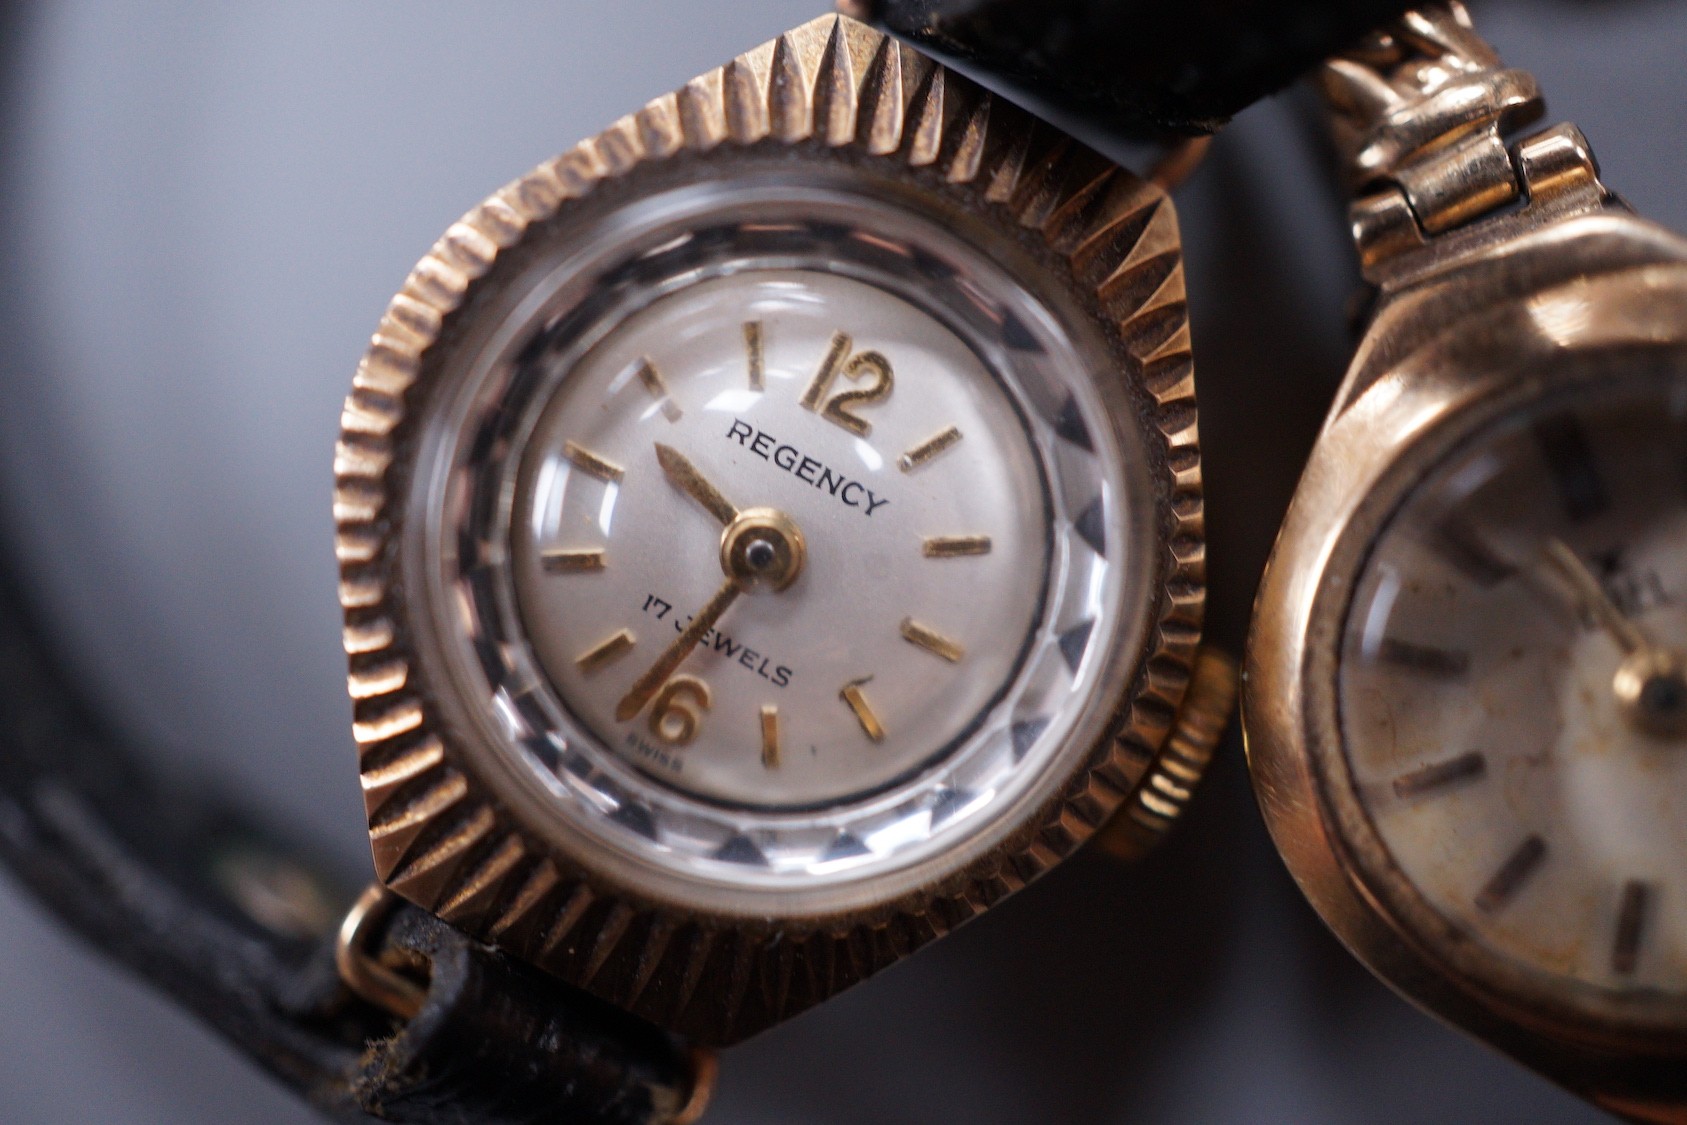 Two lady's 9ct gold manual wind wrist watches, Ebel & Majex, on 9ct bracelets, gross 25.6 grams and a lady's 9ct gold Regency manual wind wrist watch in a leather strap.